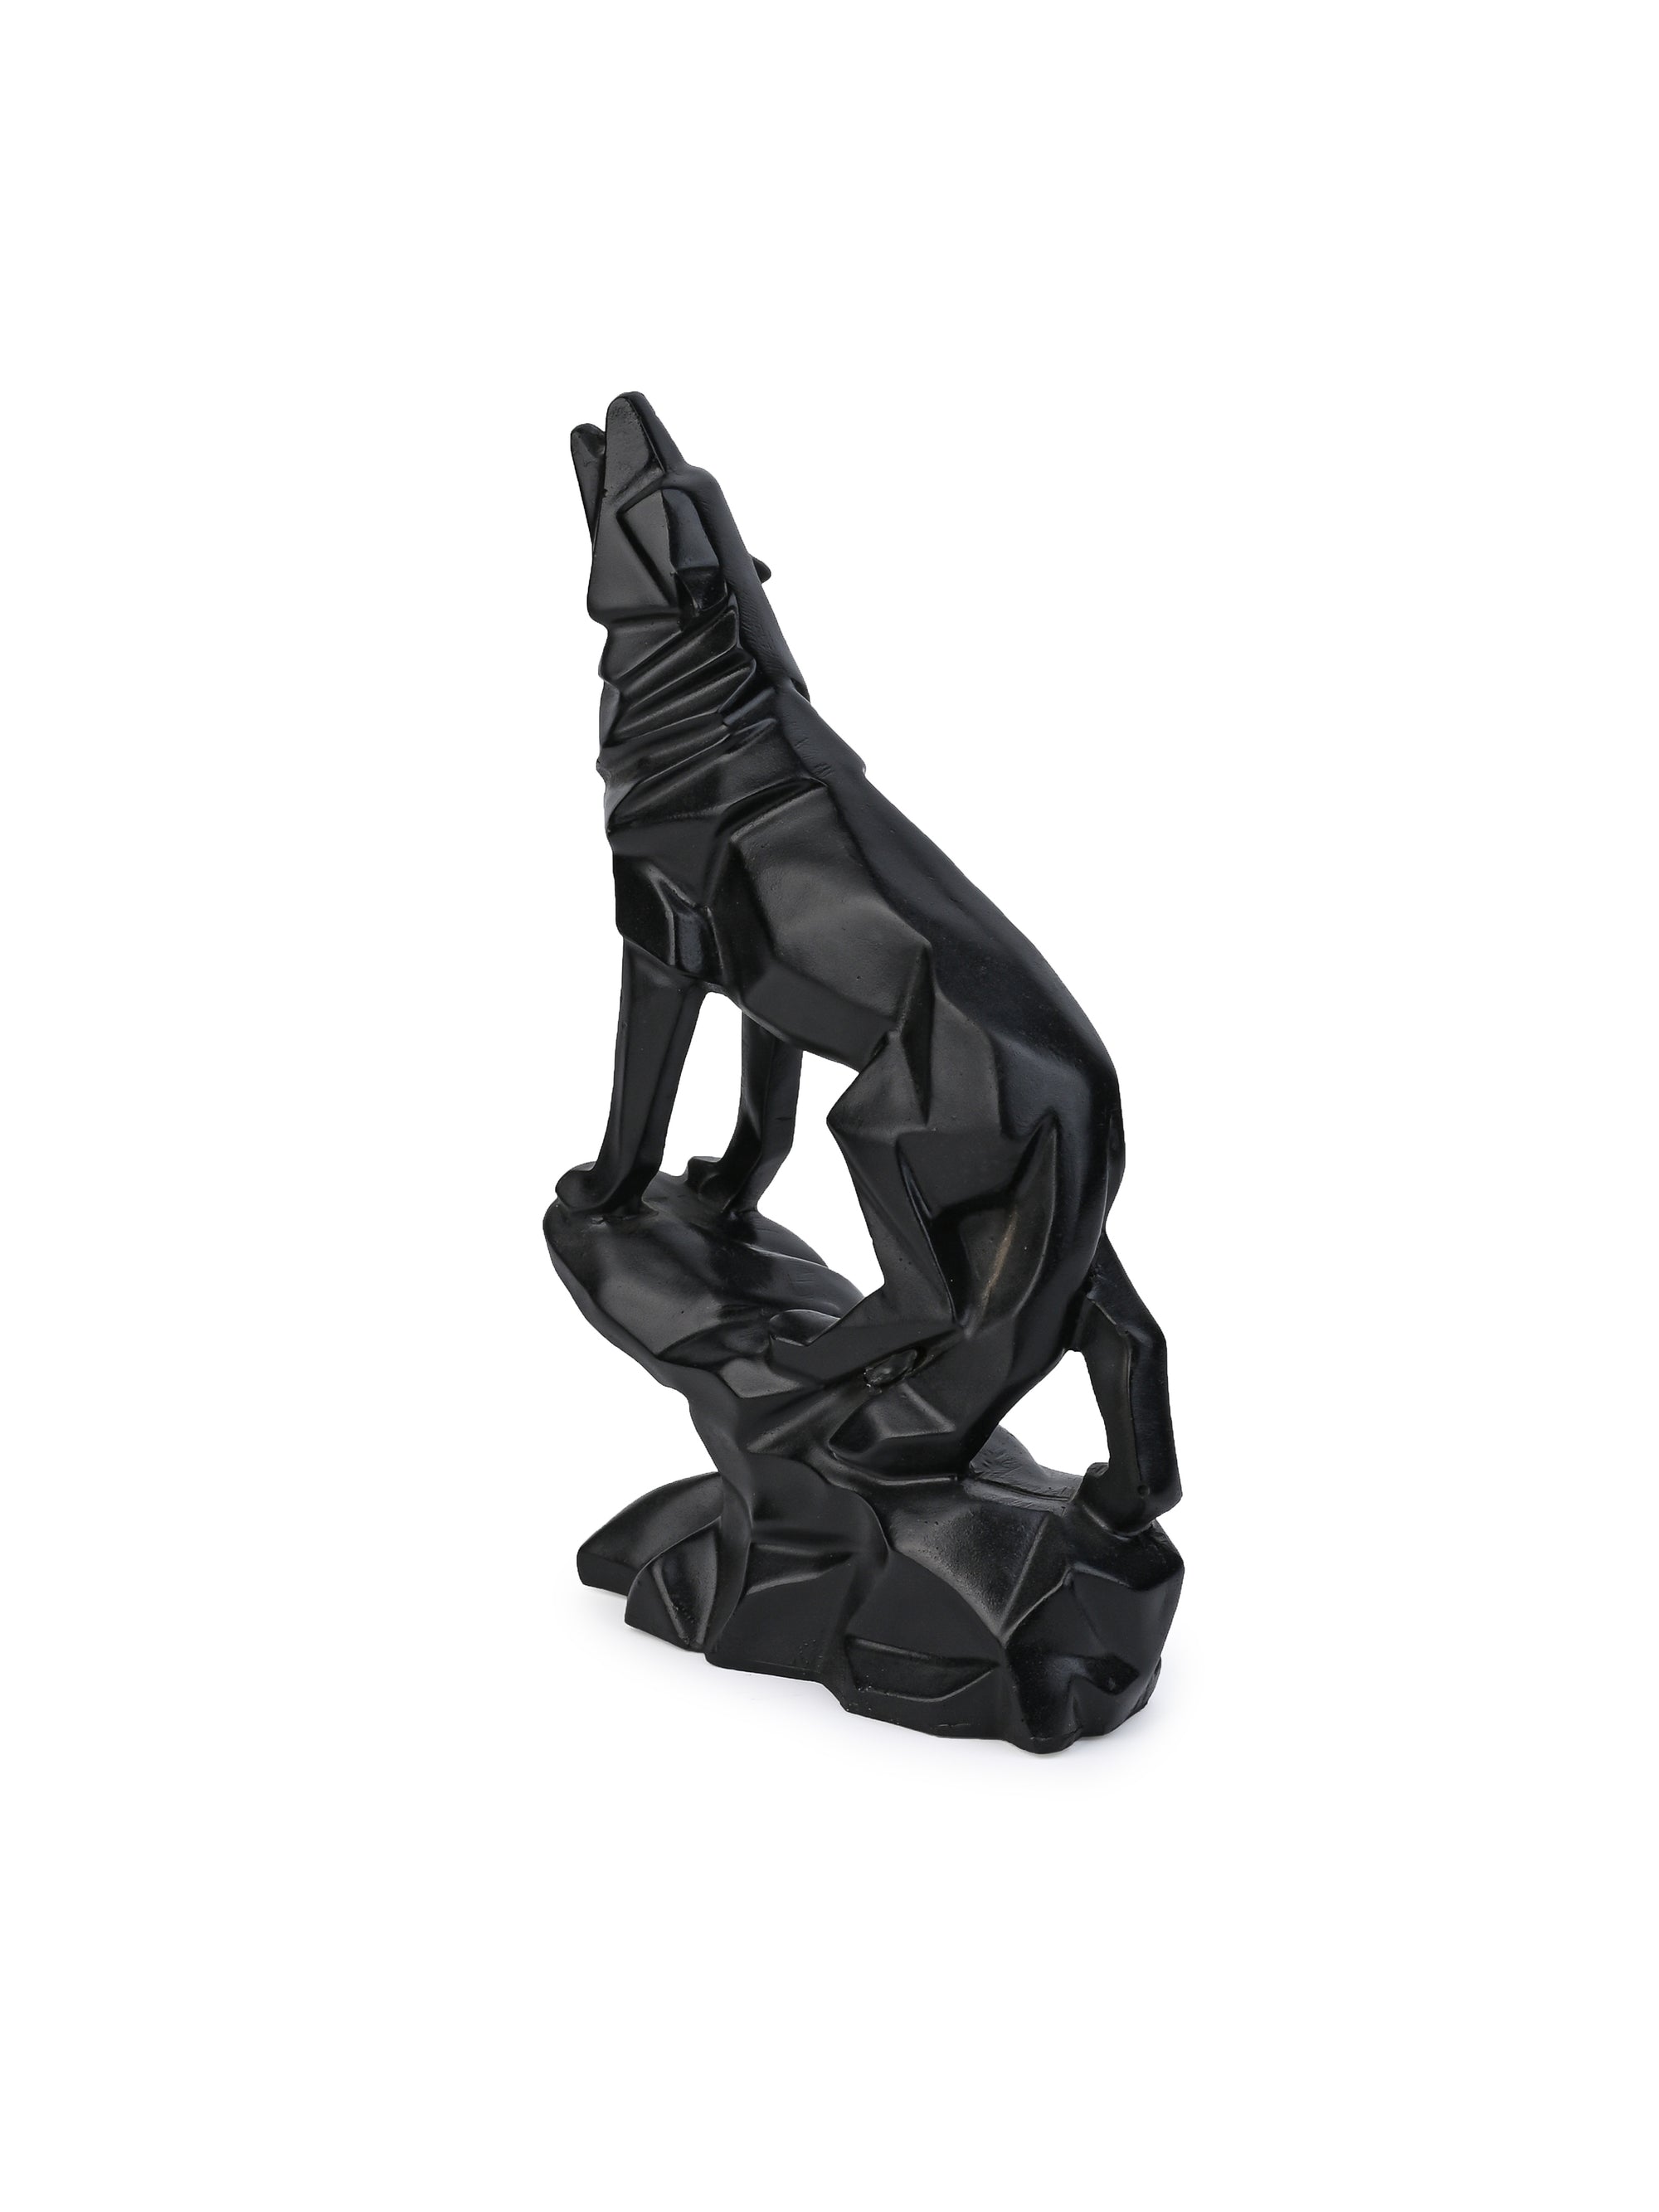 Geometric Black Wolf Table Decor Crafted from Polyresin